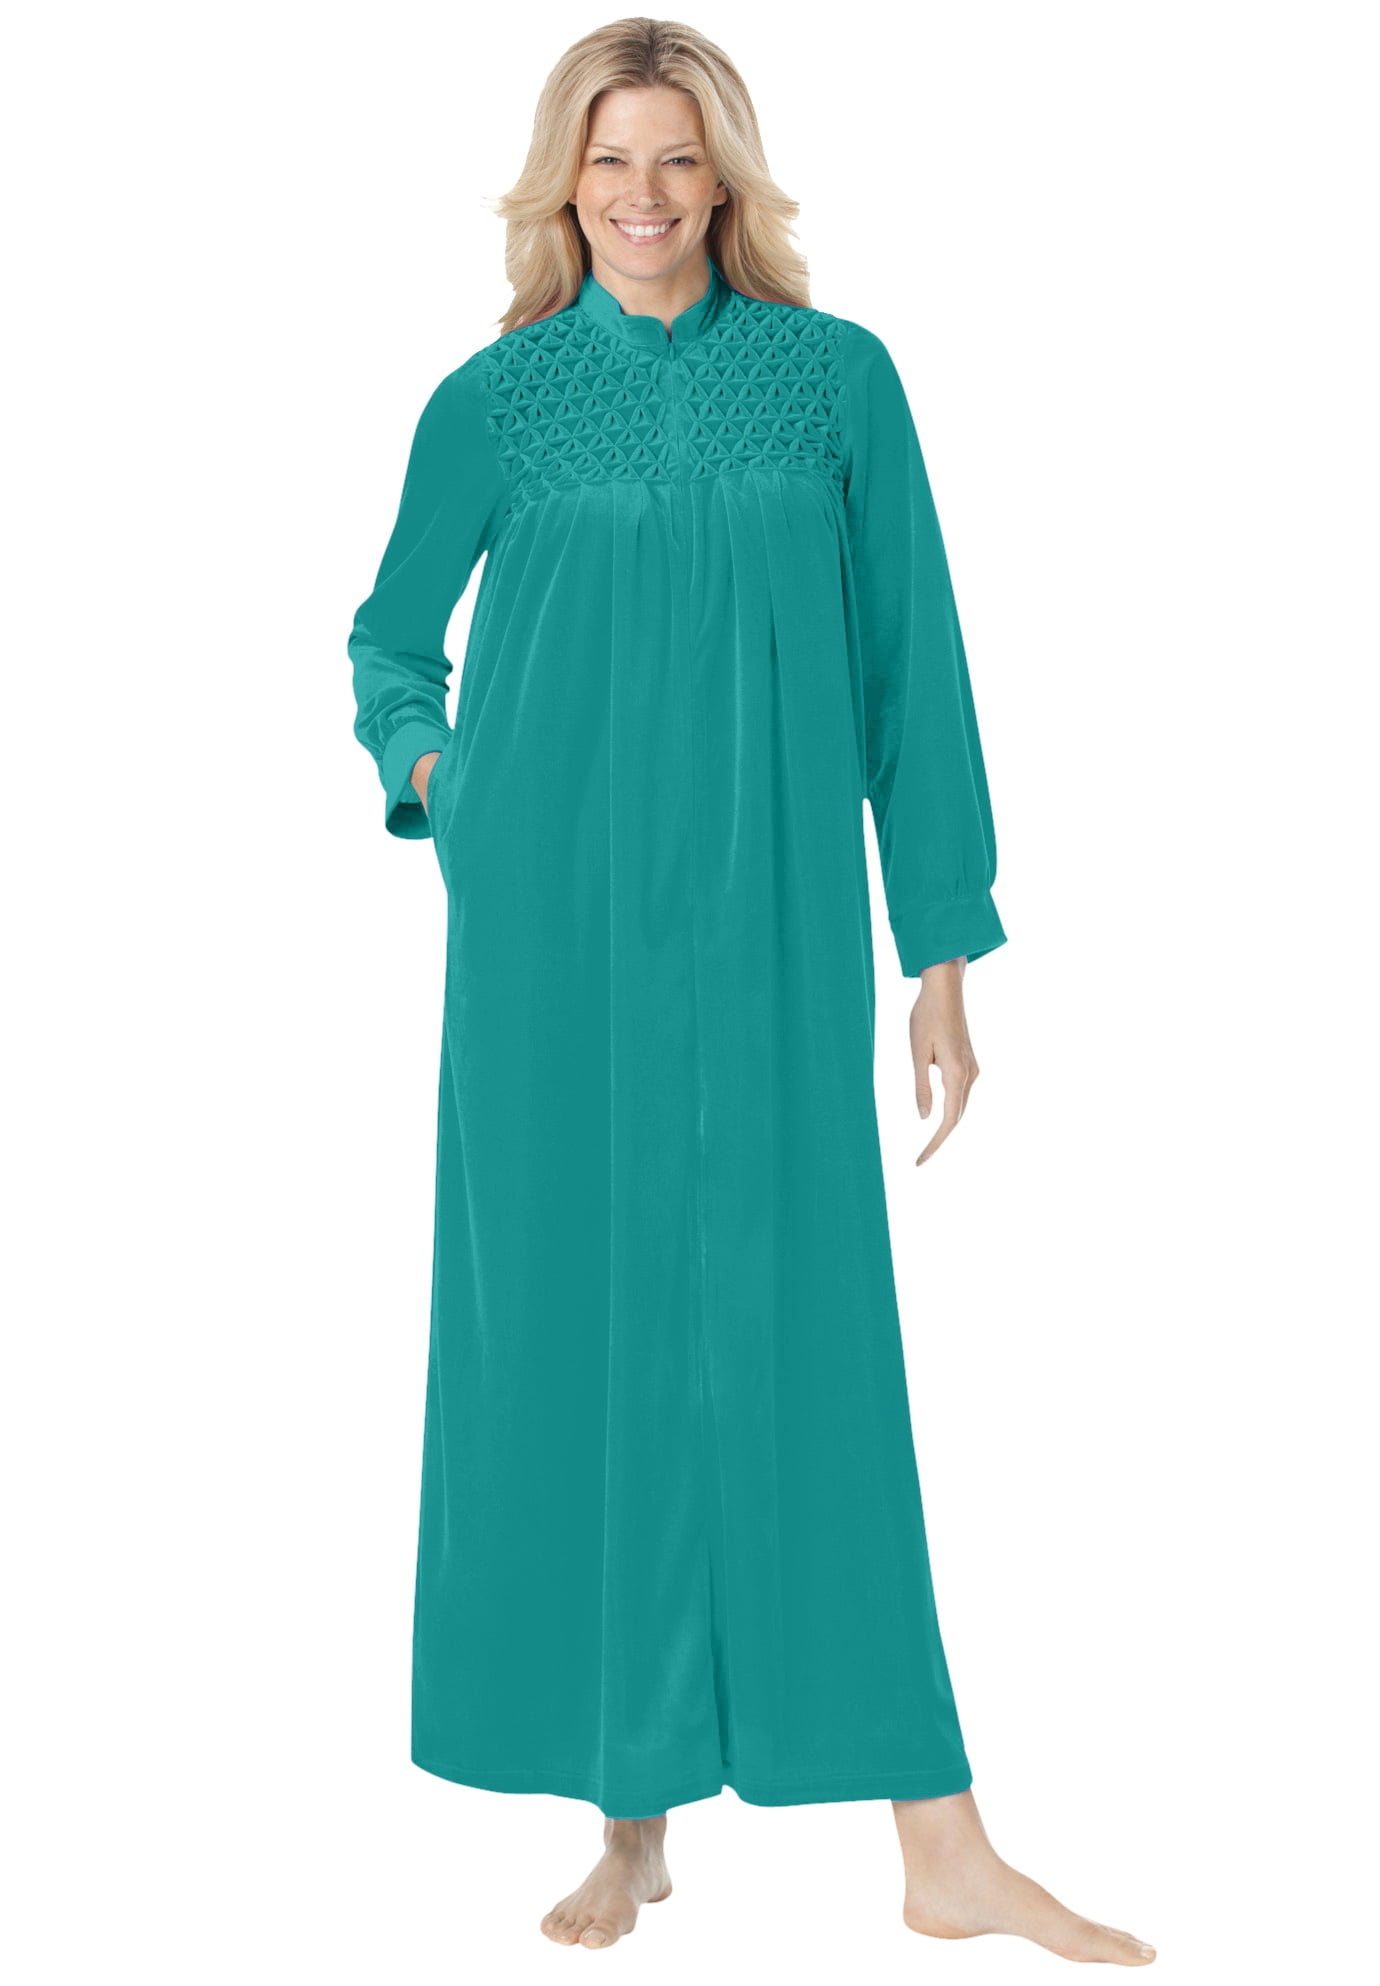 Only Necessities Women's Plus Size Smocked Velour Long Robe Robe - 4X